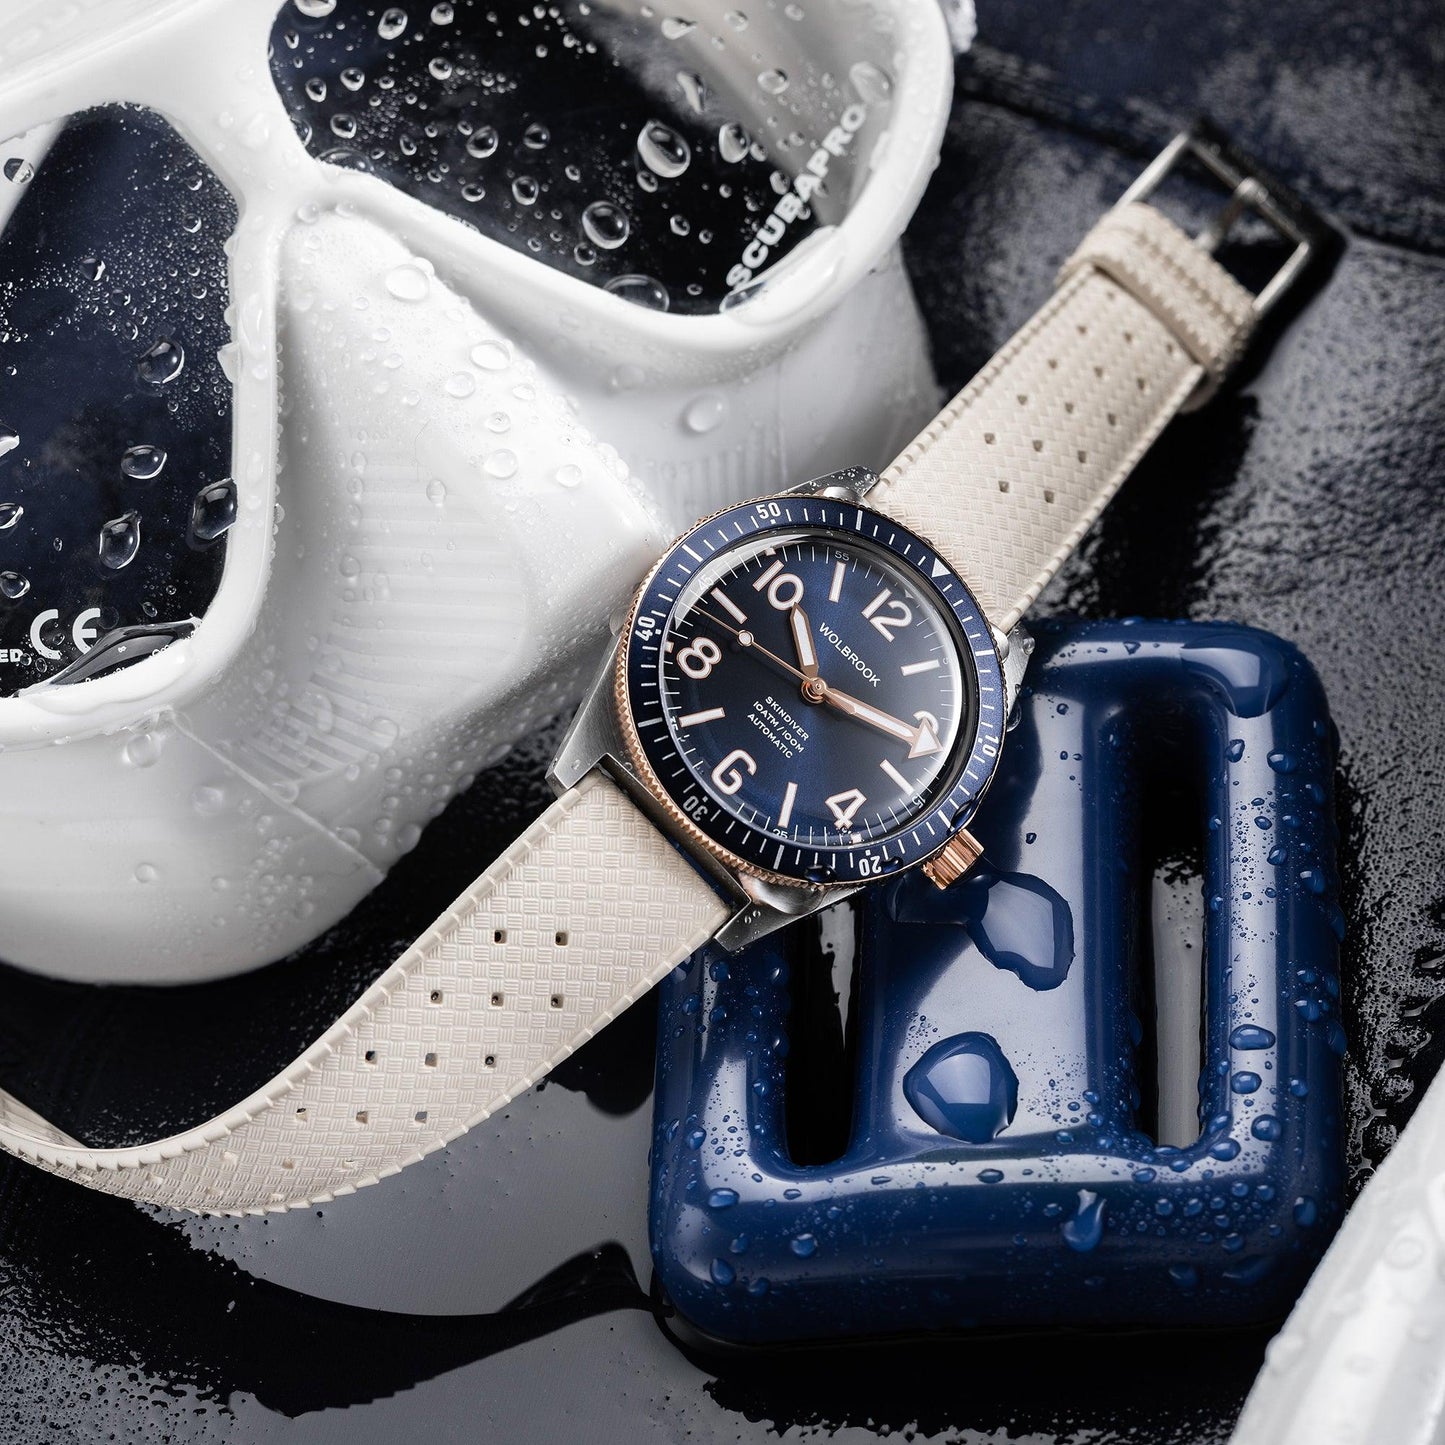 Skindiver Automatic Watch – Two-Tone Blue Sunray & White